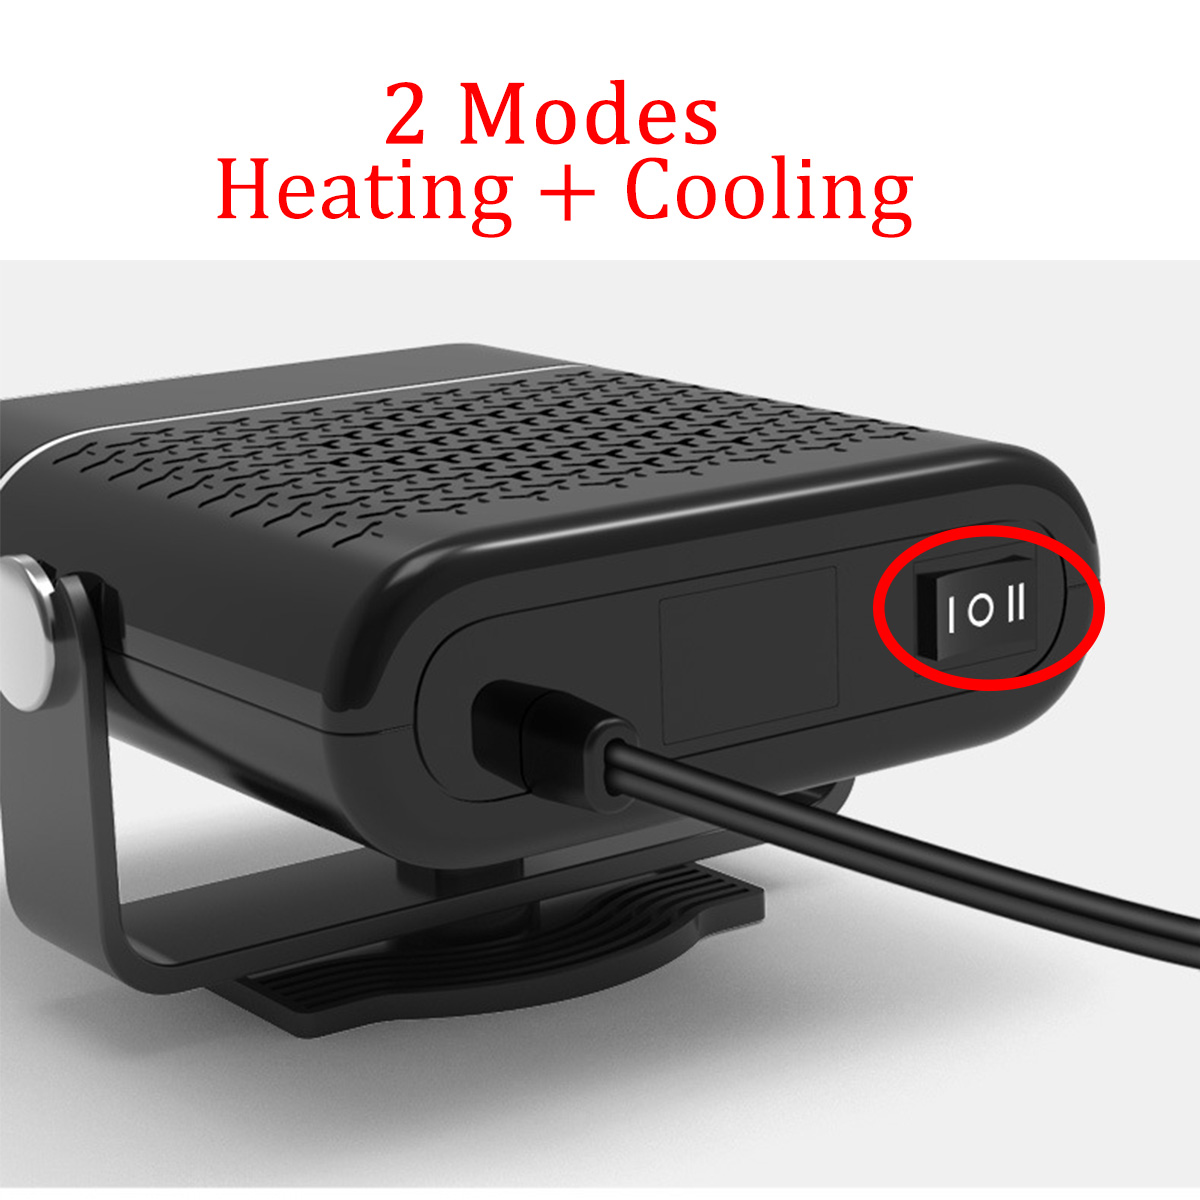 Portable-Car-Heater-Fast-Heating-Fan-360-Degree-Rotary-Winter-Defroster-Demisting-Air-Purification-1-1773296-6